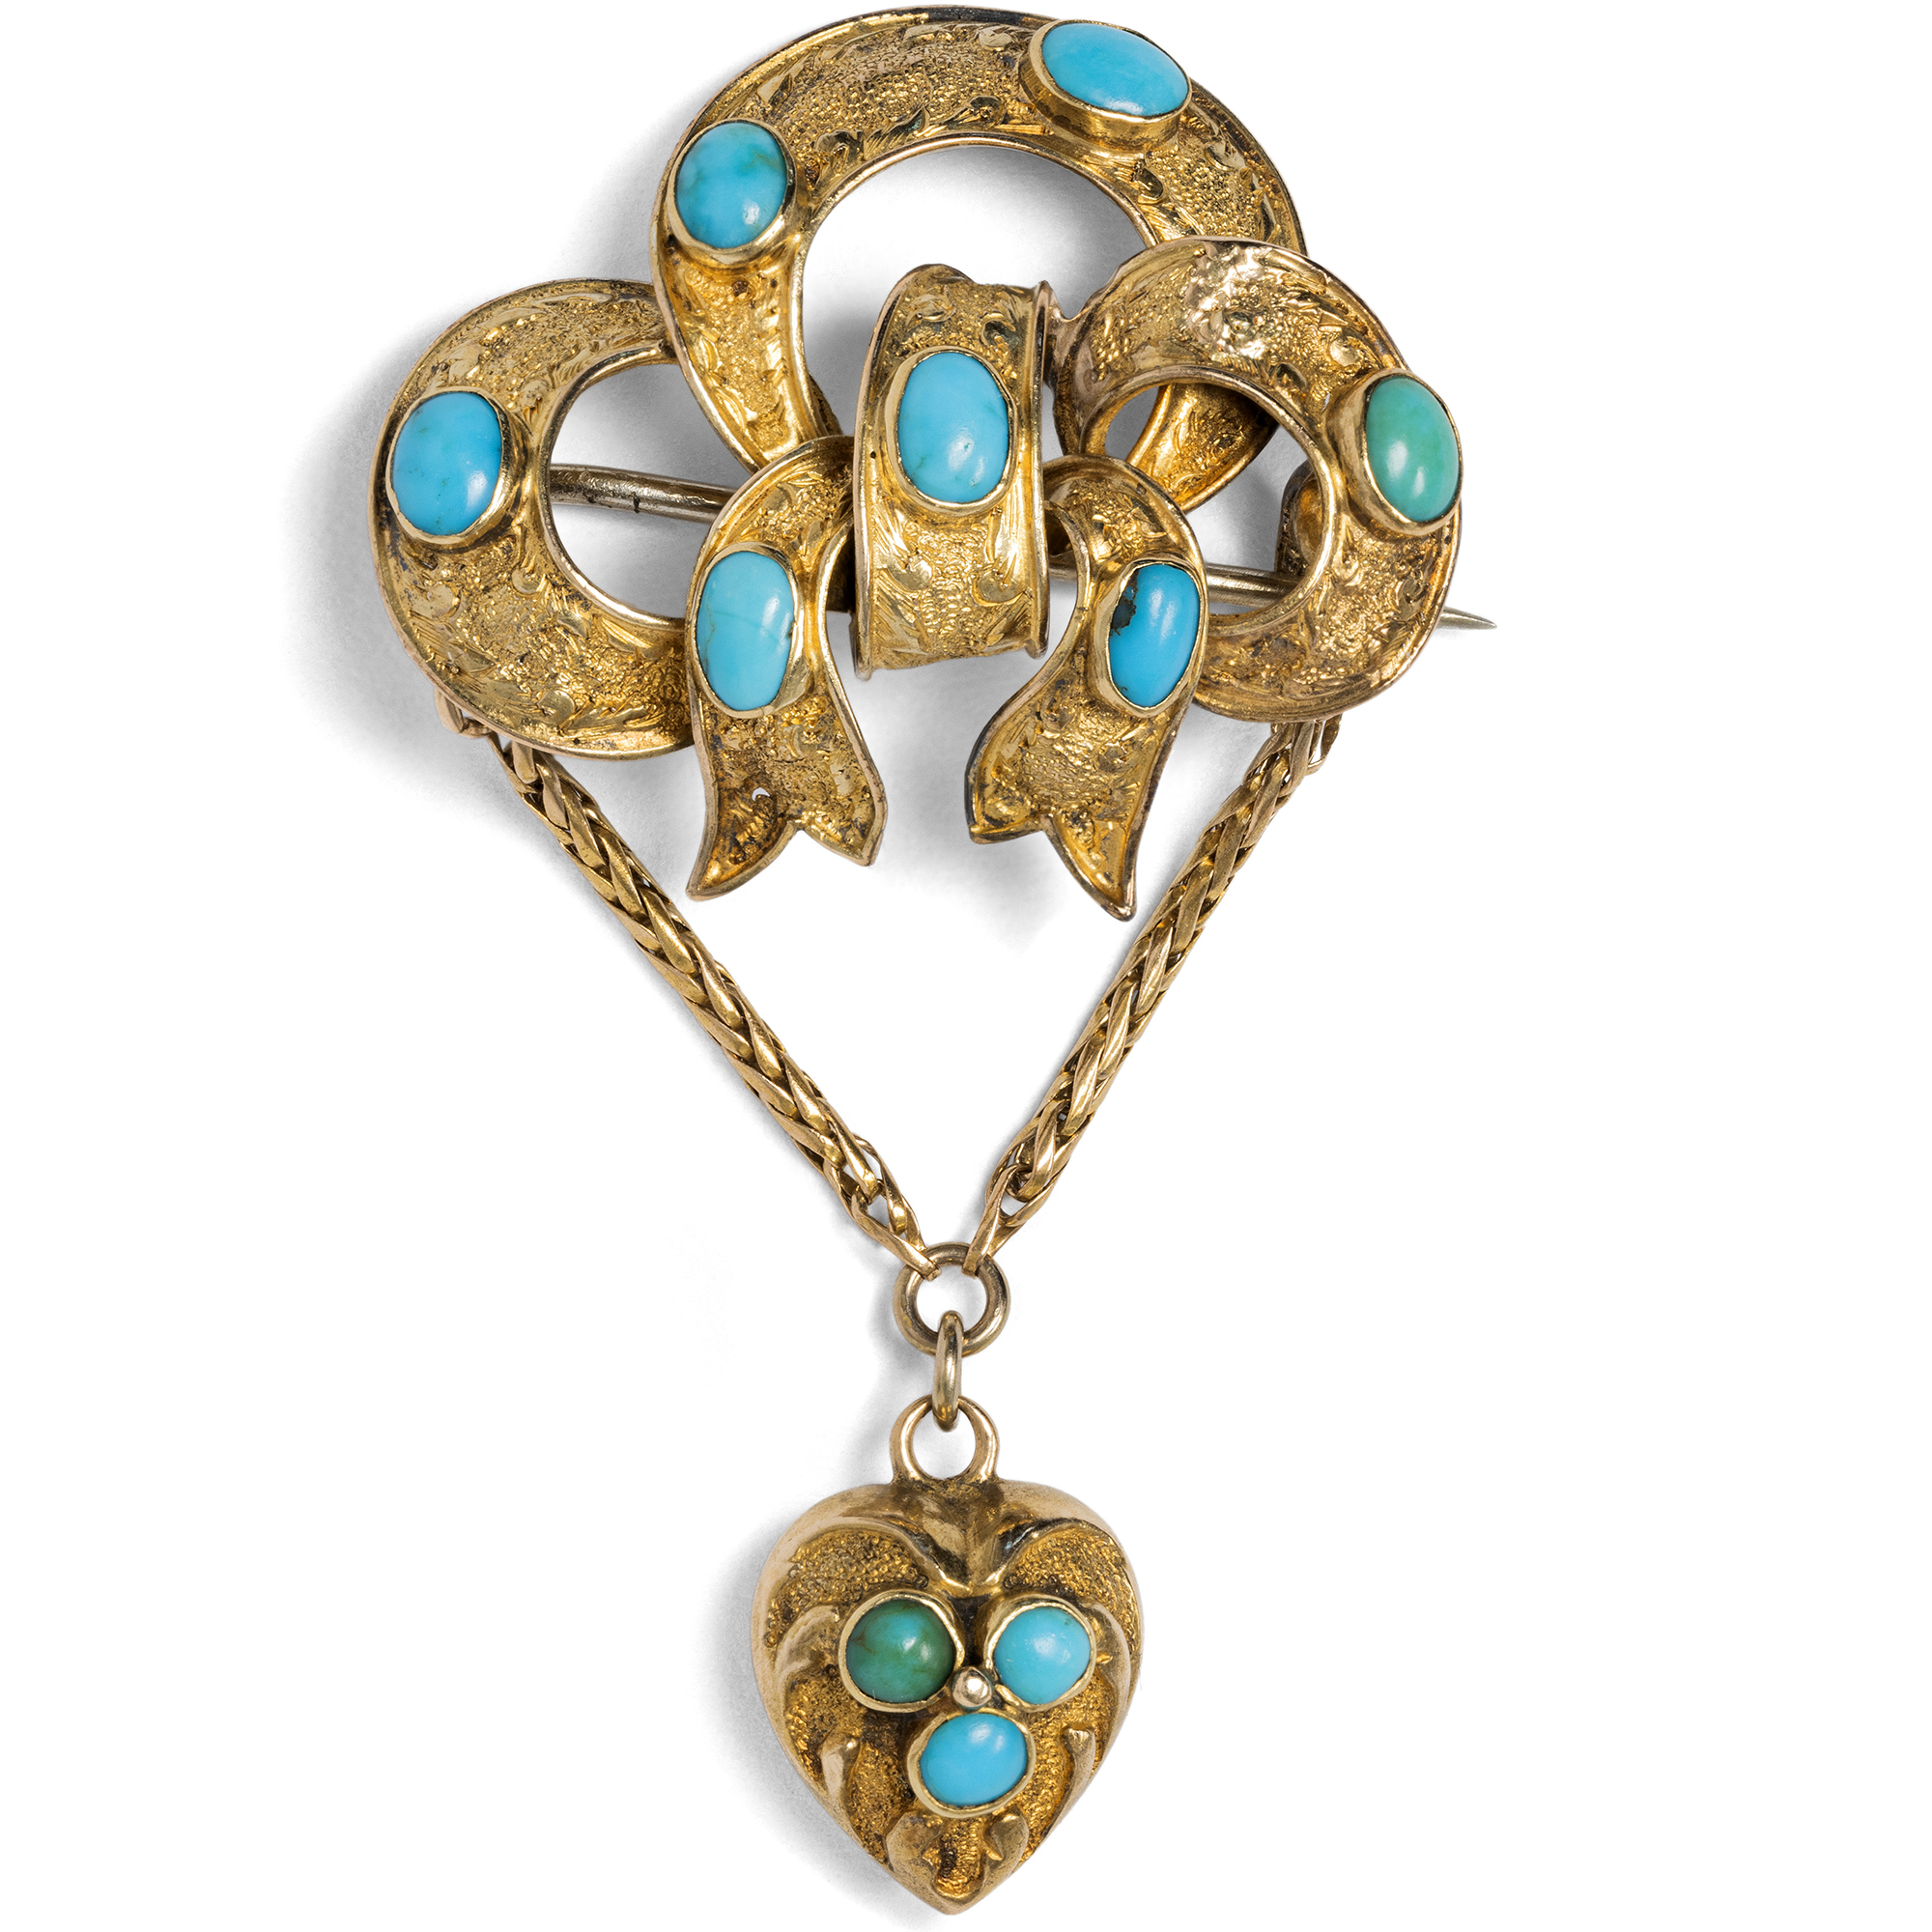 Romantic Brooch With Turquoises in Gold, Great Britain Around 1850